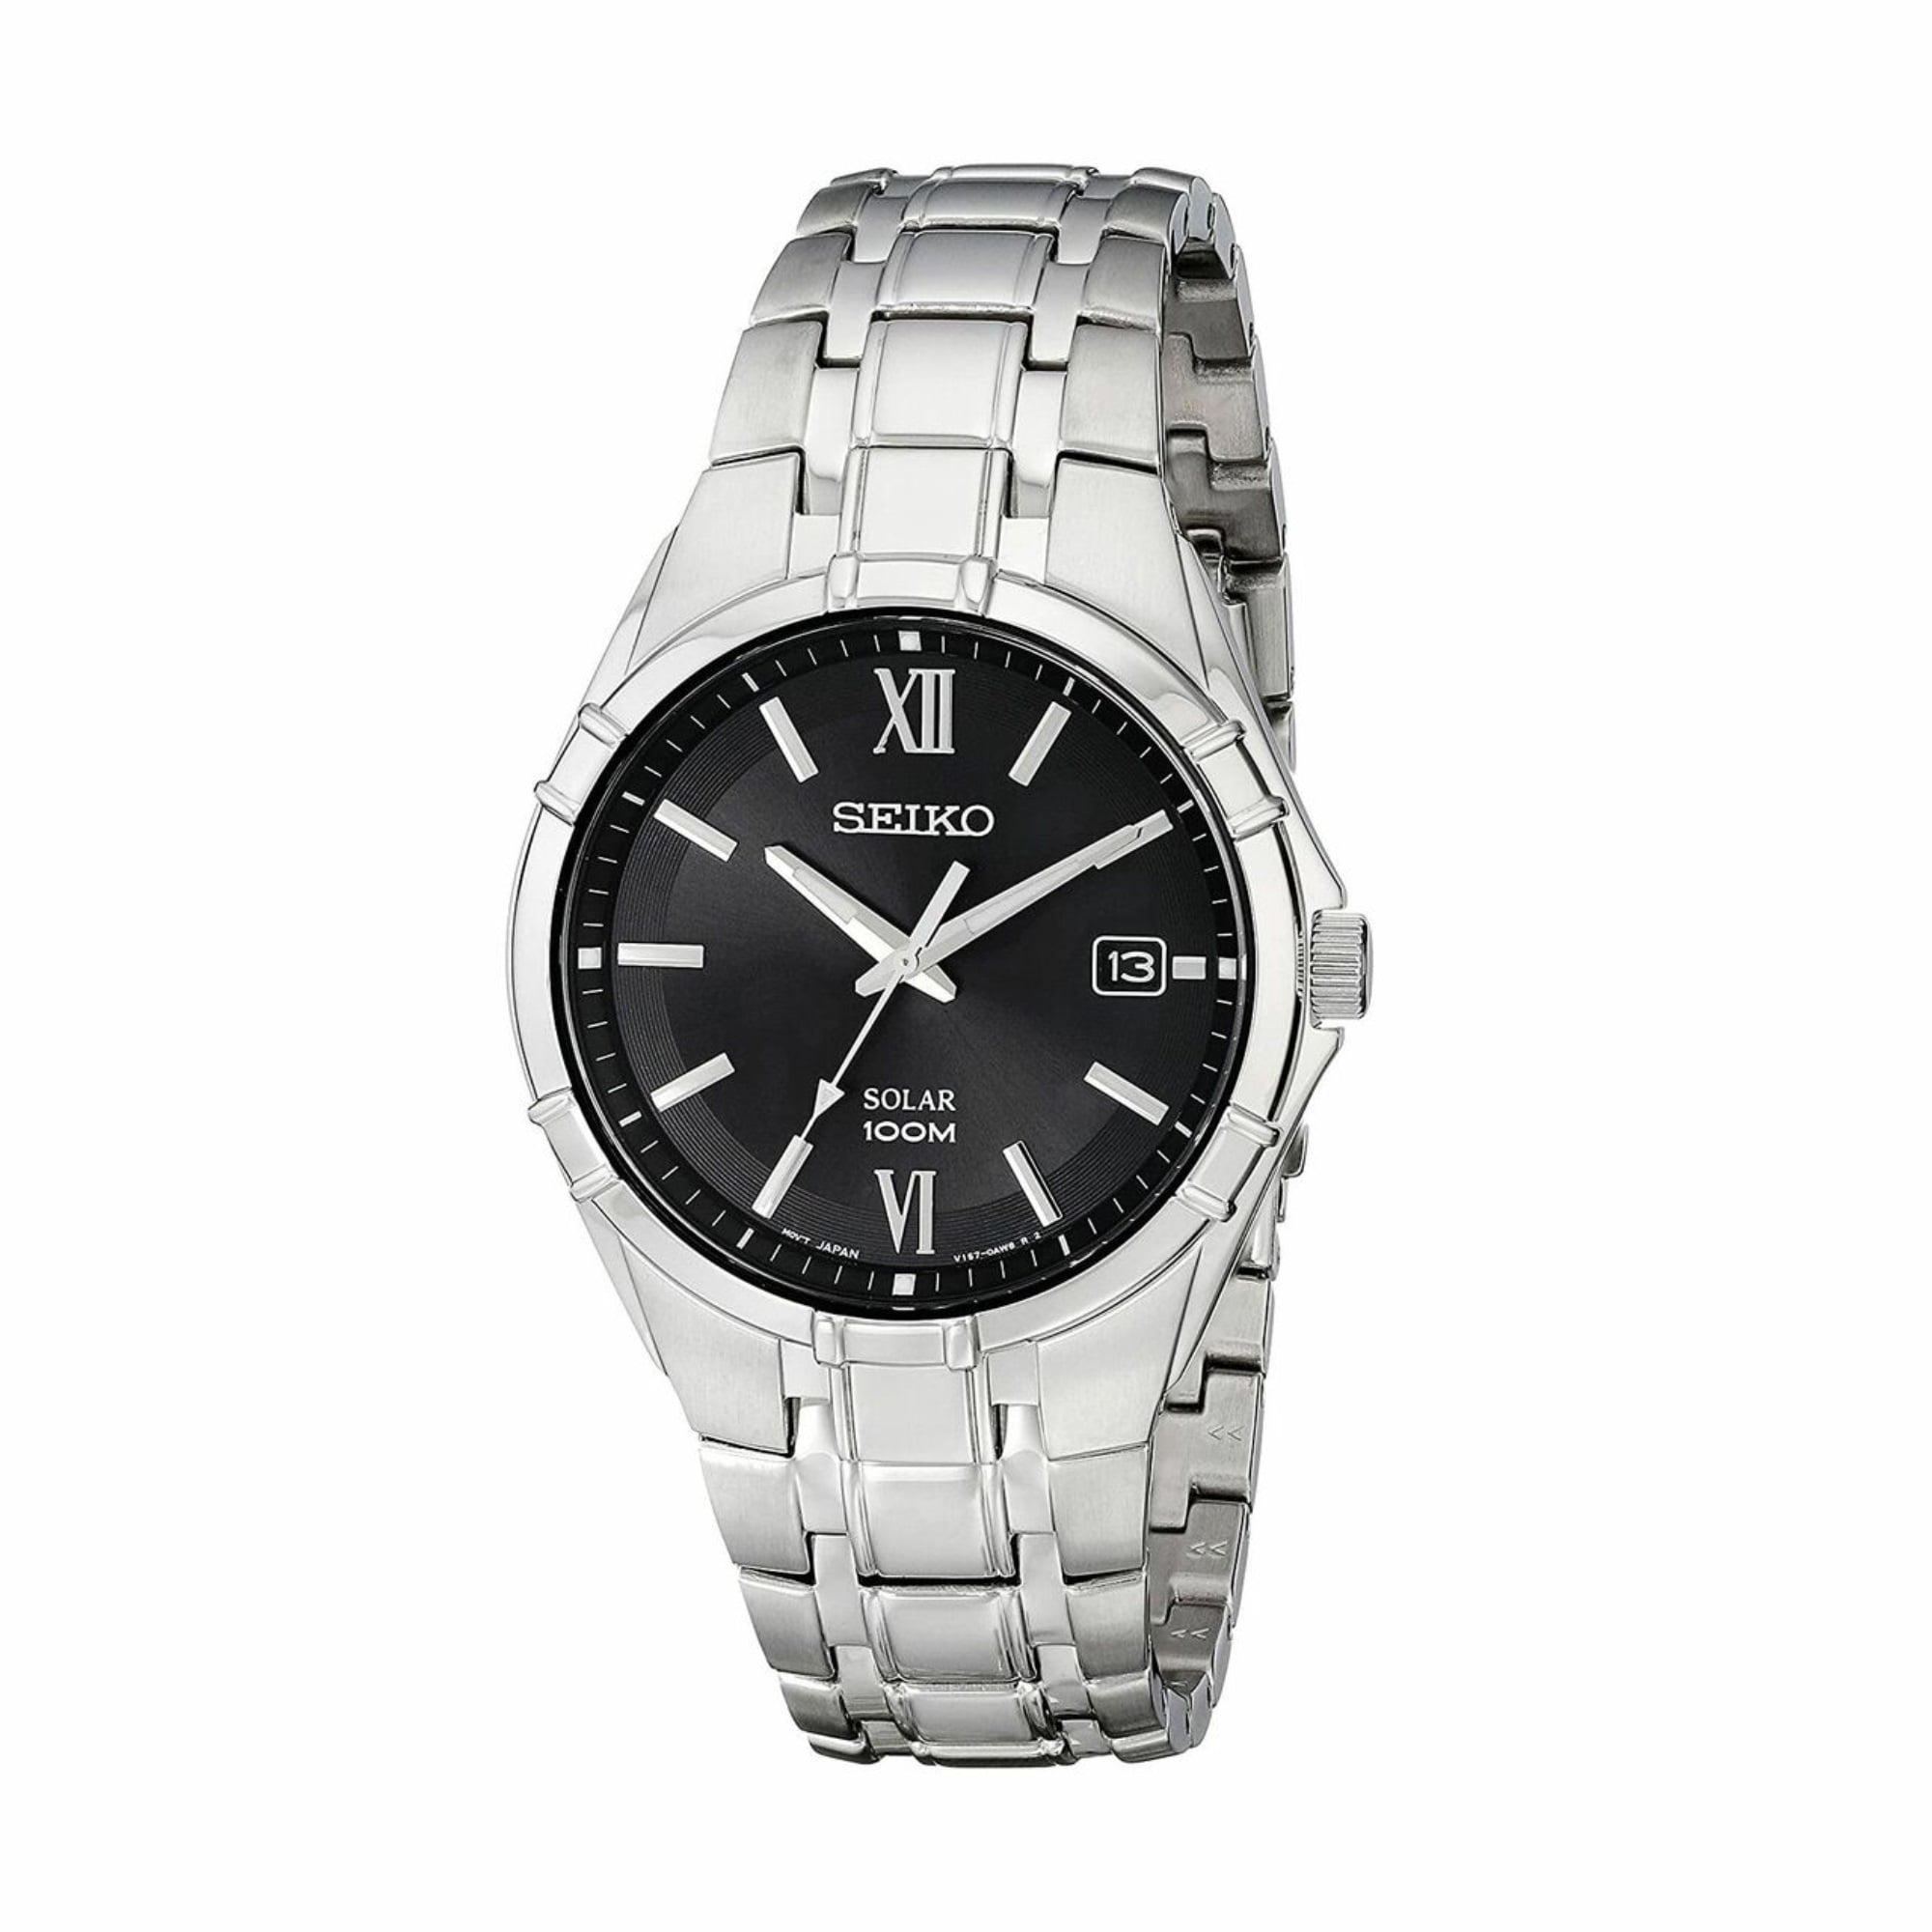 Seiko Men's SNZG13 '5 Series' Automatic Stainless Steel Watch 